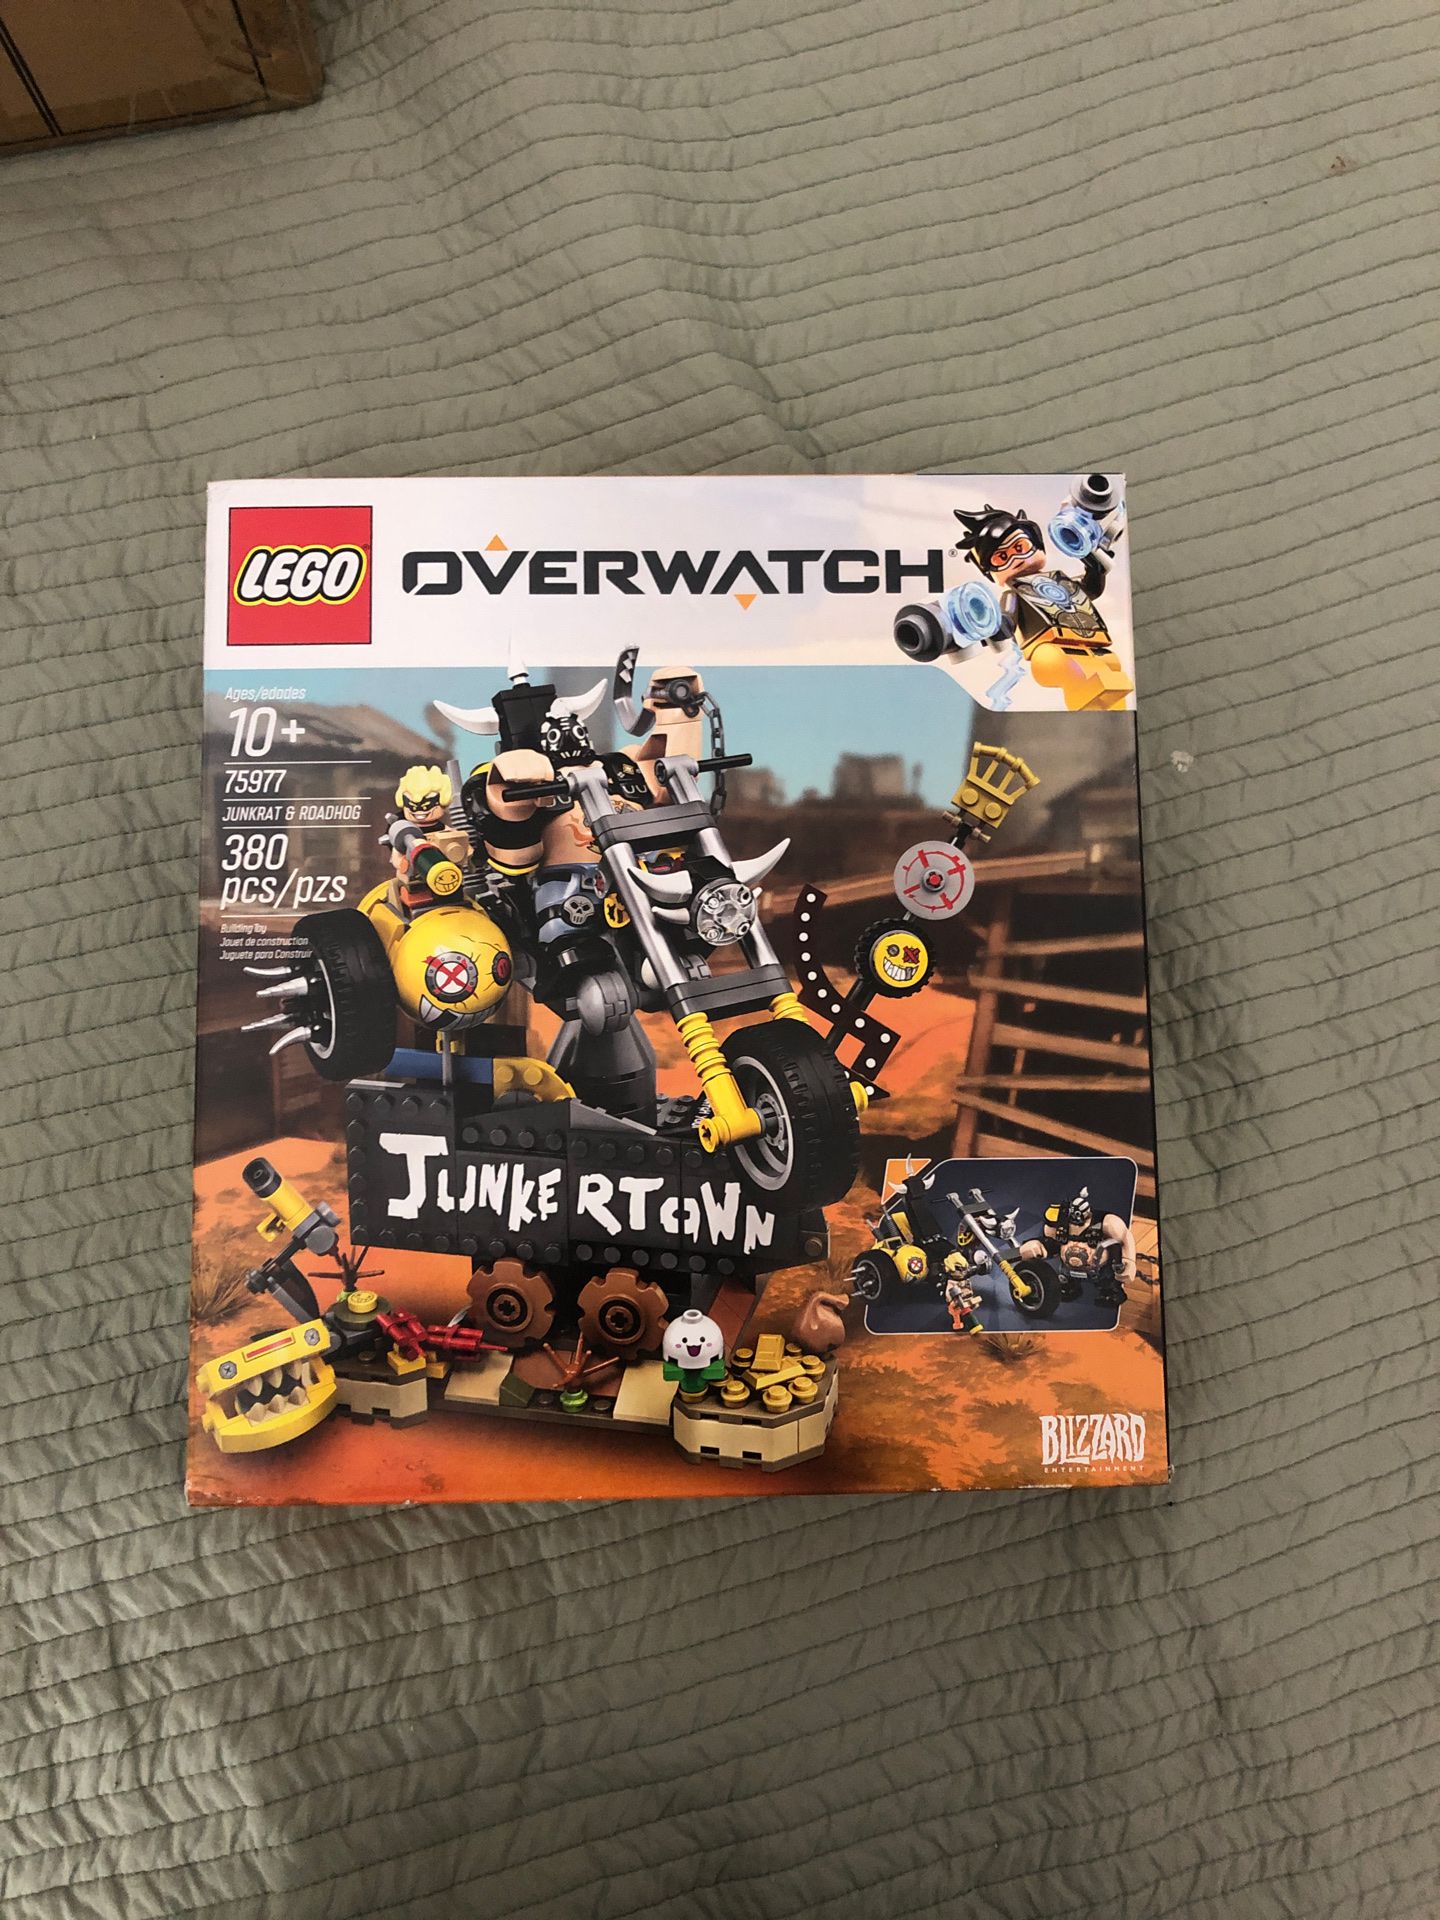 Lego 75977 over watched New Sealed